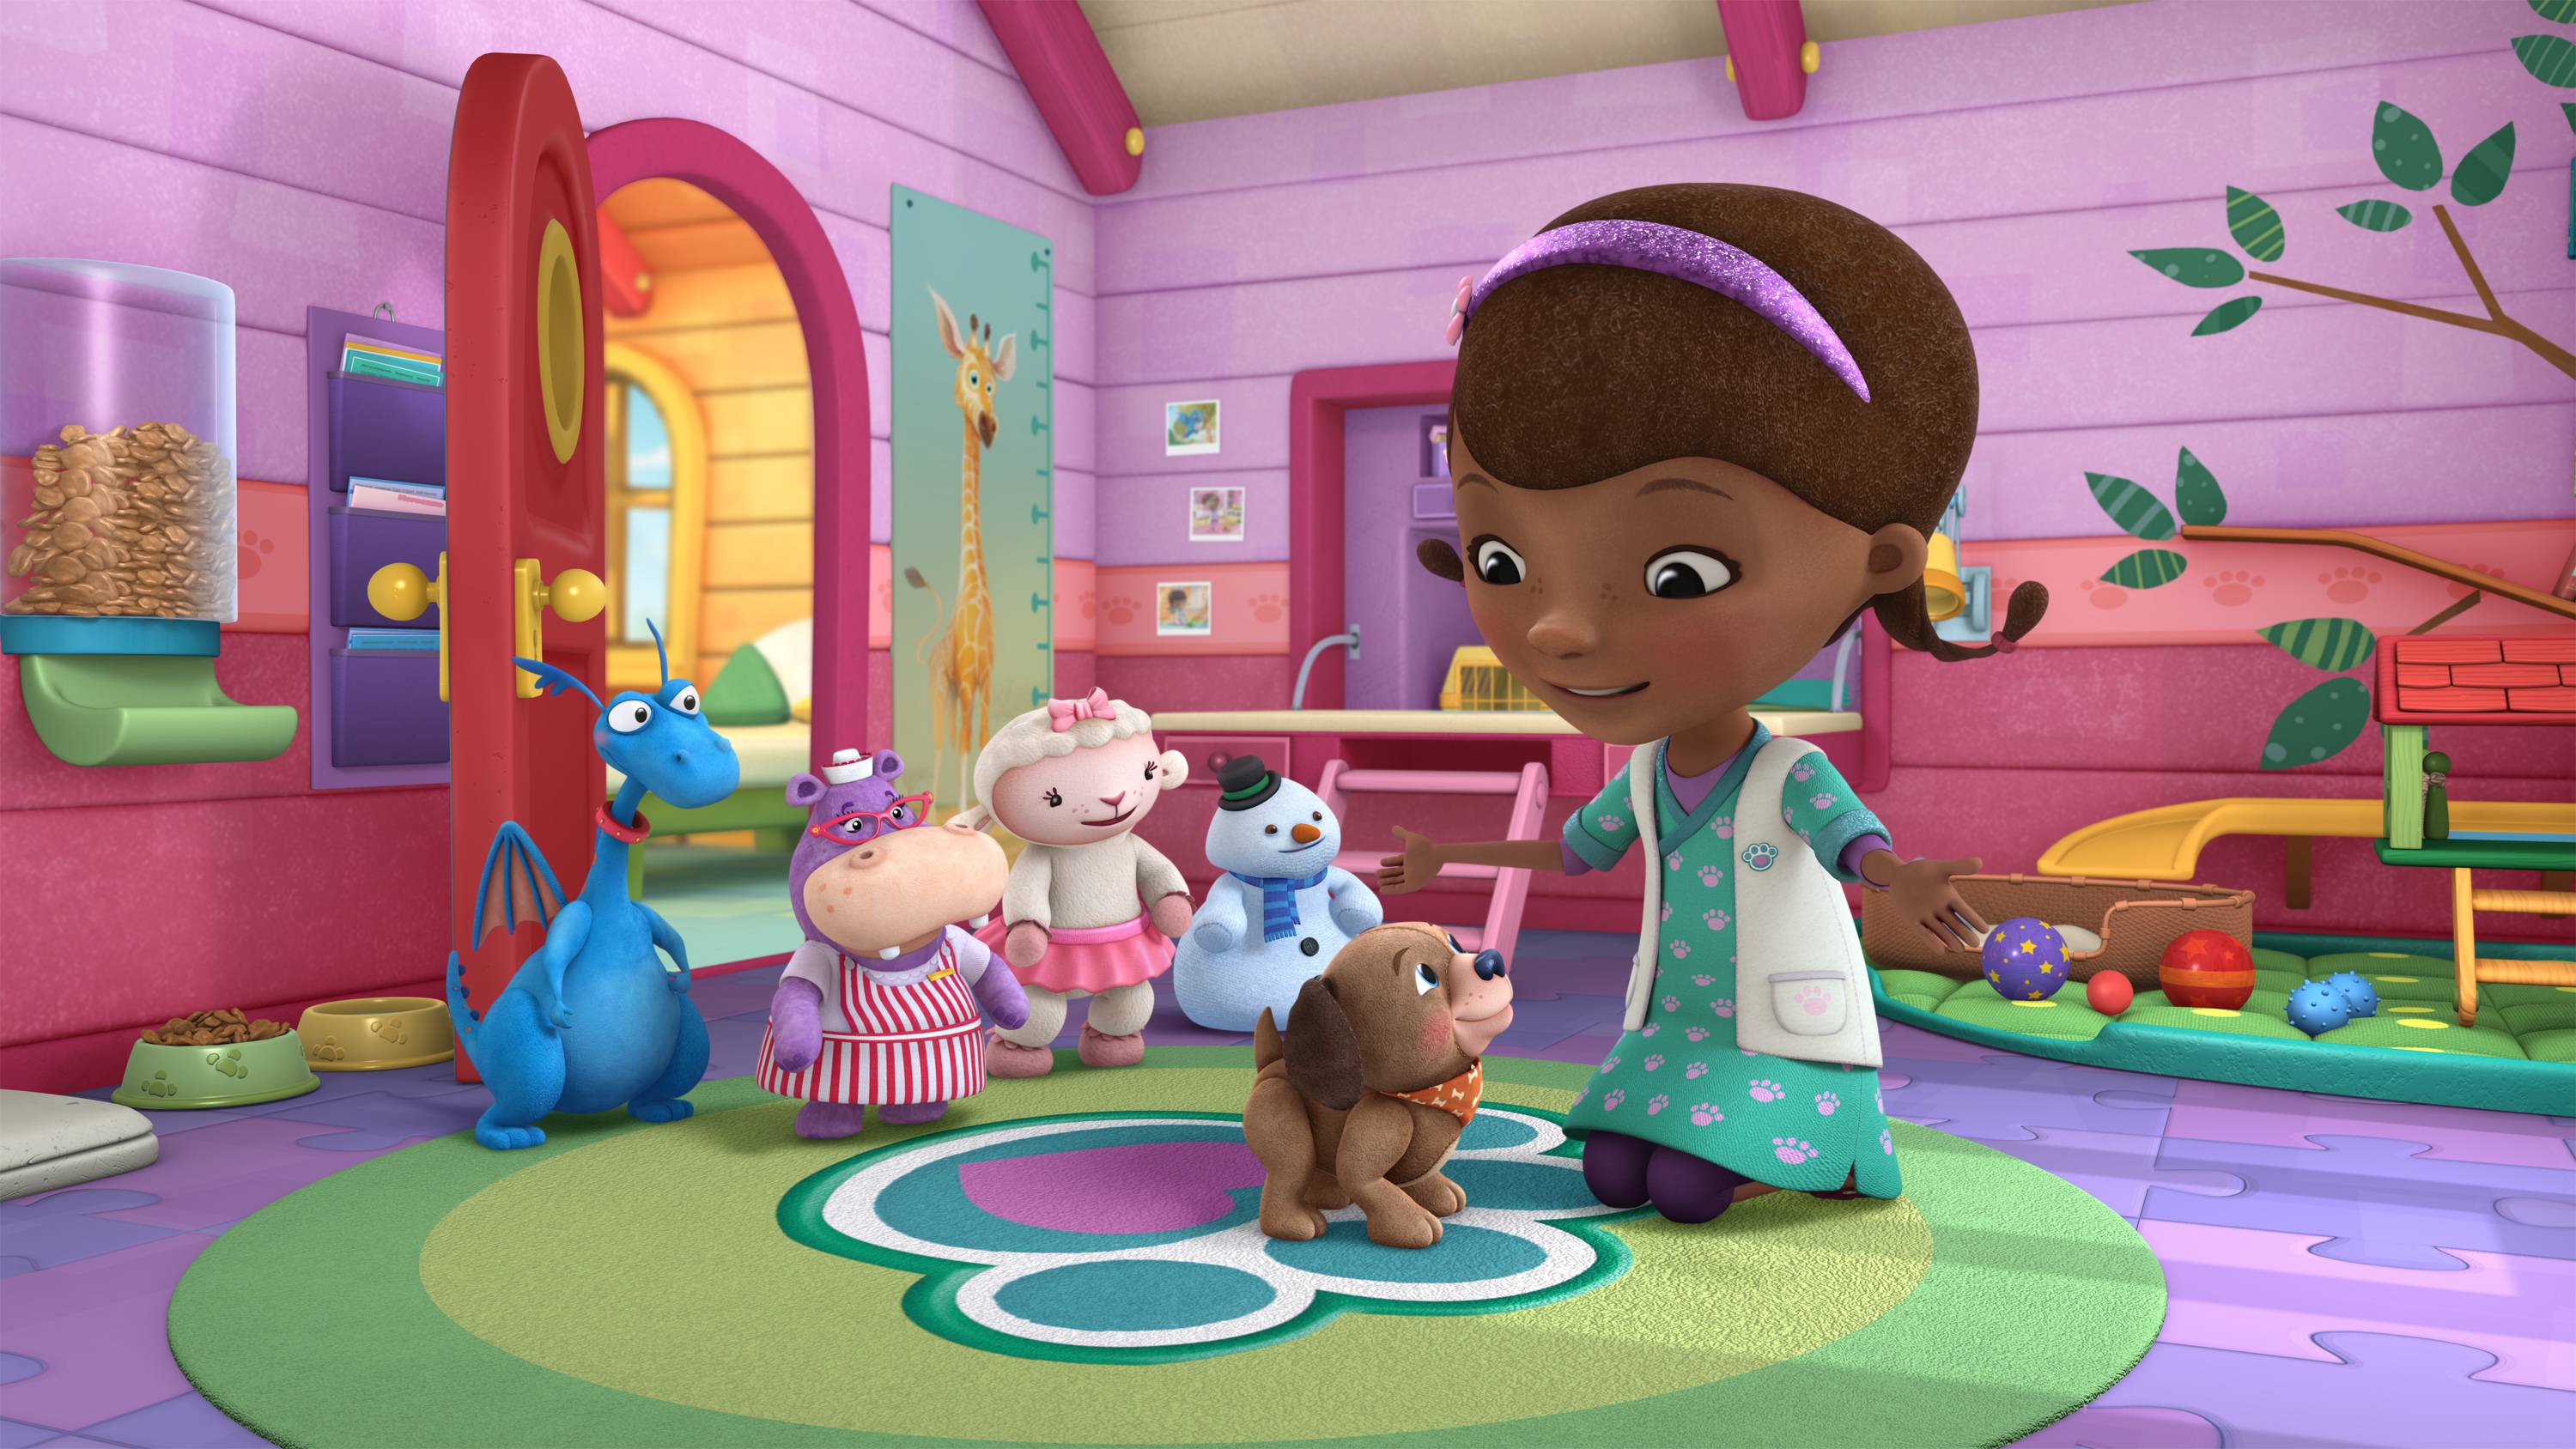 DOC MCSTUFFINS - "Fetchin' Findo" - Doc McStuffins opens a new veterinary practice in her backyard clinic where she treats stuffed animals and toys -- in a "Doc McStuffins" programming event for kids age 2-7 that will highlight care and responsibility for pets. The multi-episode story arc, "Doc McStuffins: Pet Vet," presented in collaboration with the ASPCA (The American Society for the Prevention of Cruelty to Animals(r)), Solid Gold Holistic Pet Food and Nationwide, begins FRIDAY, AUGUST 14 (9:00-10:00 a.m., ET/PT) on Disney Channel and WATCH Disney Junior. Additional pet-themed episodes of "Doc McStuffins" will roll out on Disney Channel, Disney Junior and WATCH Disney Junior. (Disney Junior) STUFFY, HALLIE, LAMBY, CHILLY, FINDO, DOC